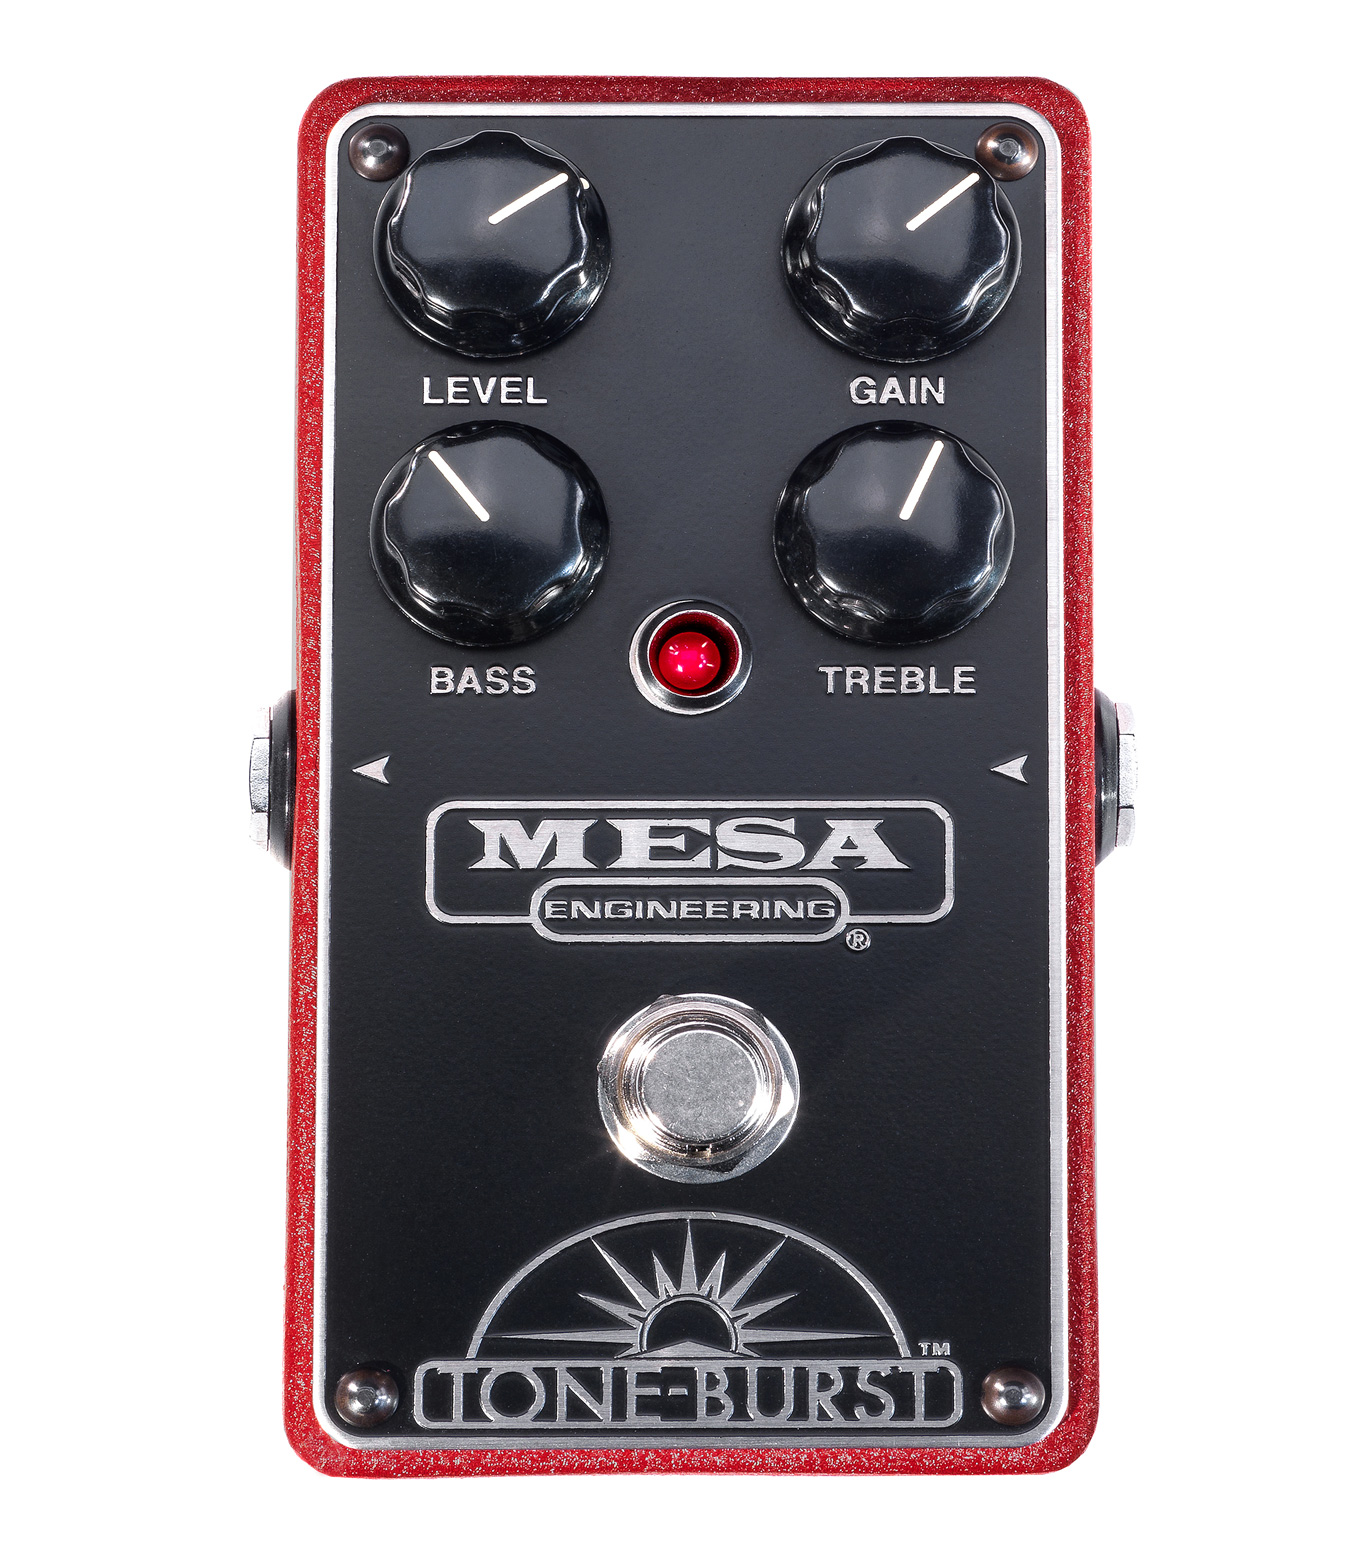 buy mesaboogie tone burst clean boost pedal